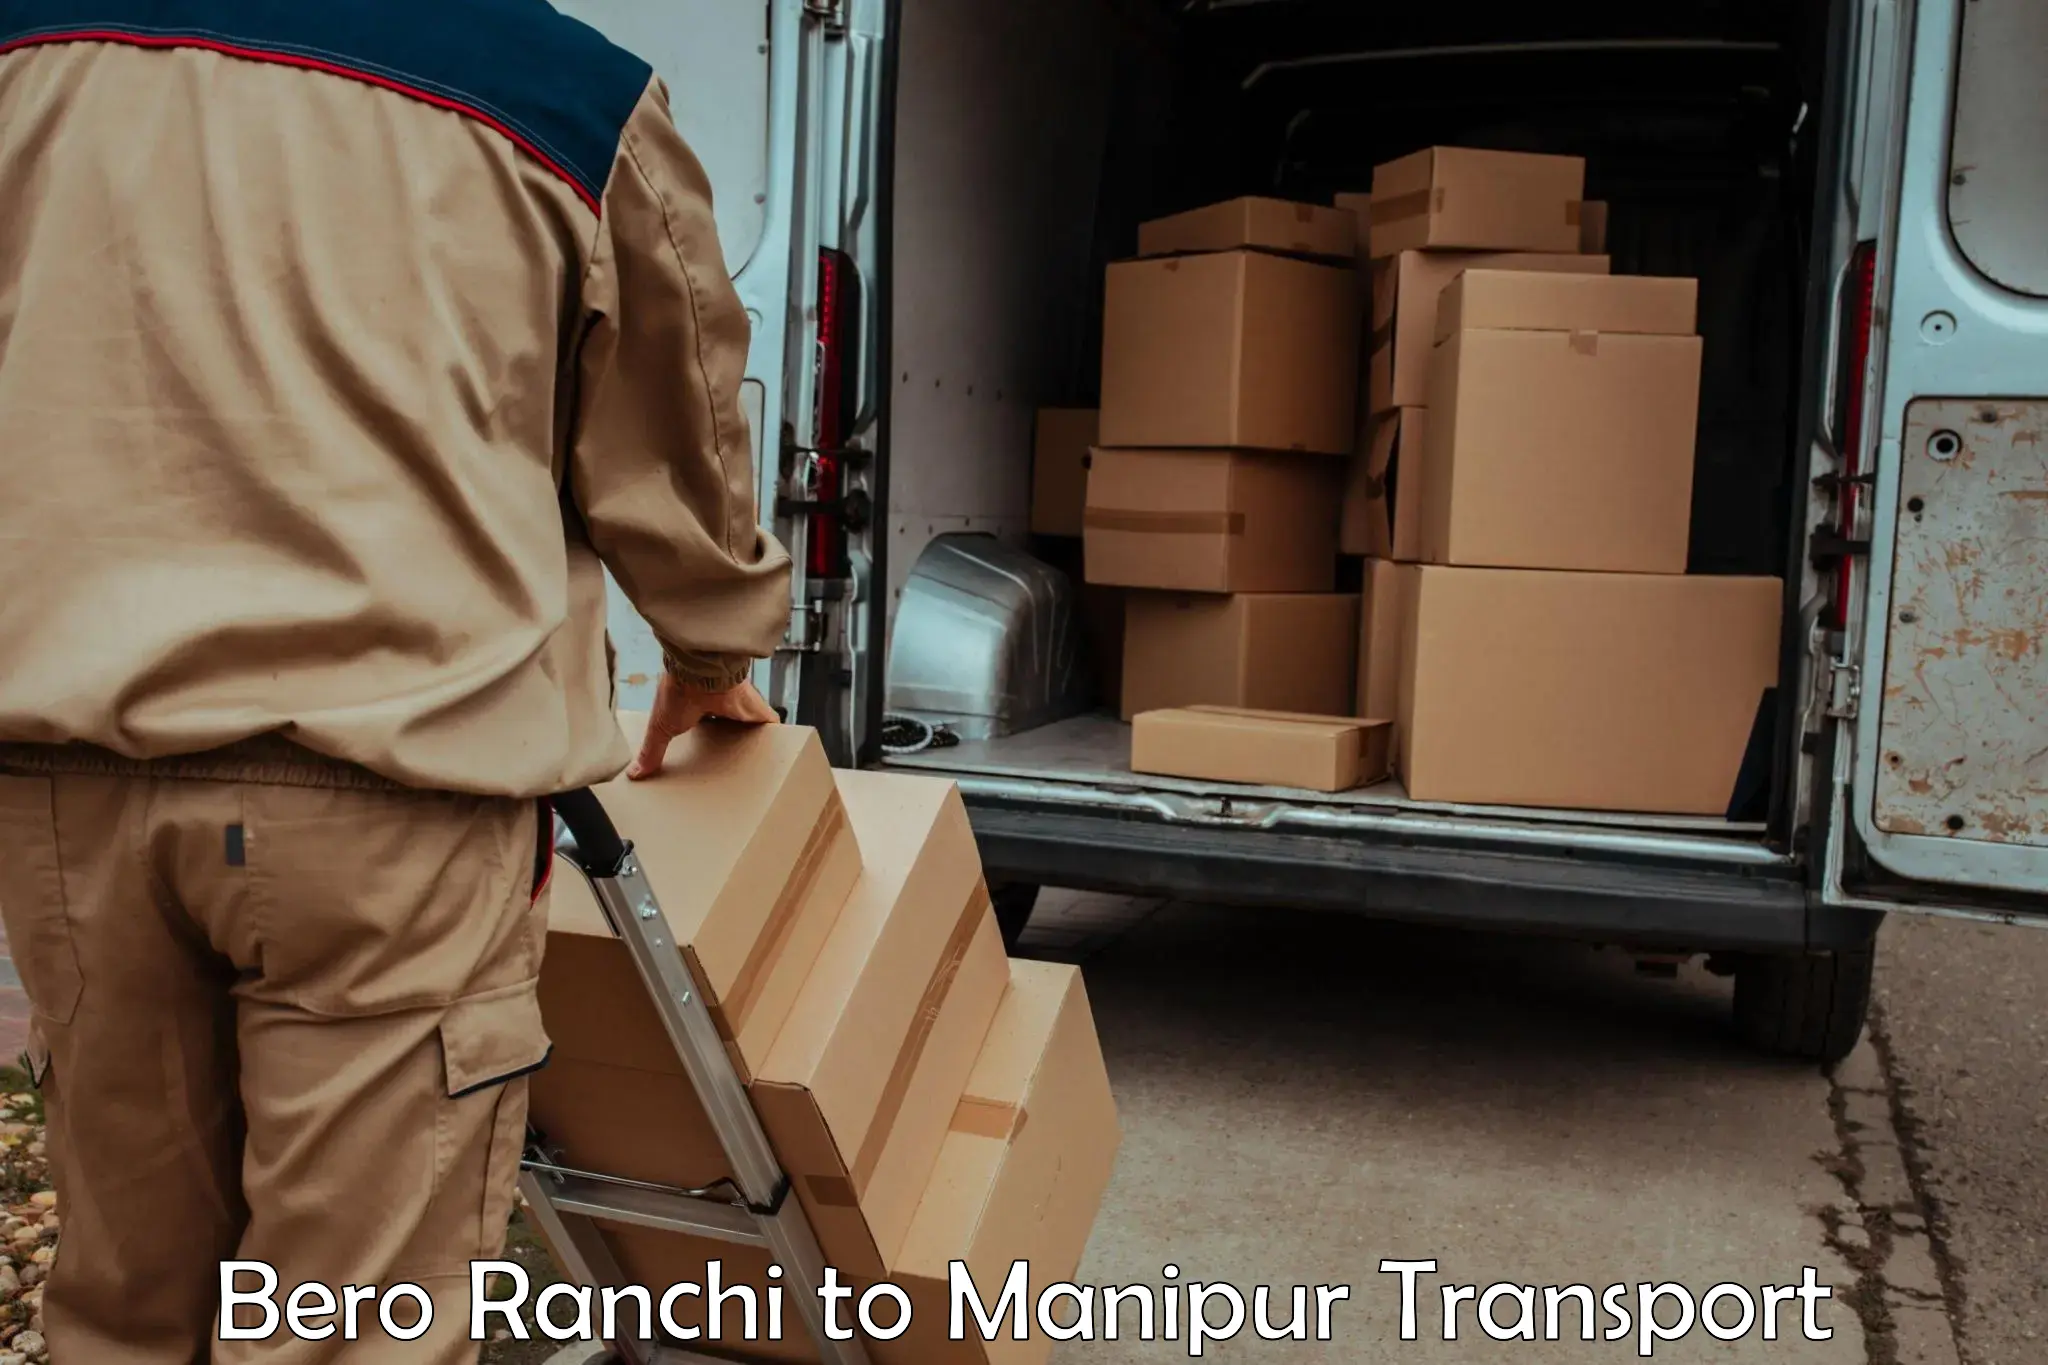 Air freight transport services Bero Ranchi to Chandel